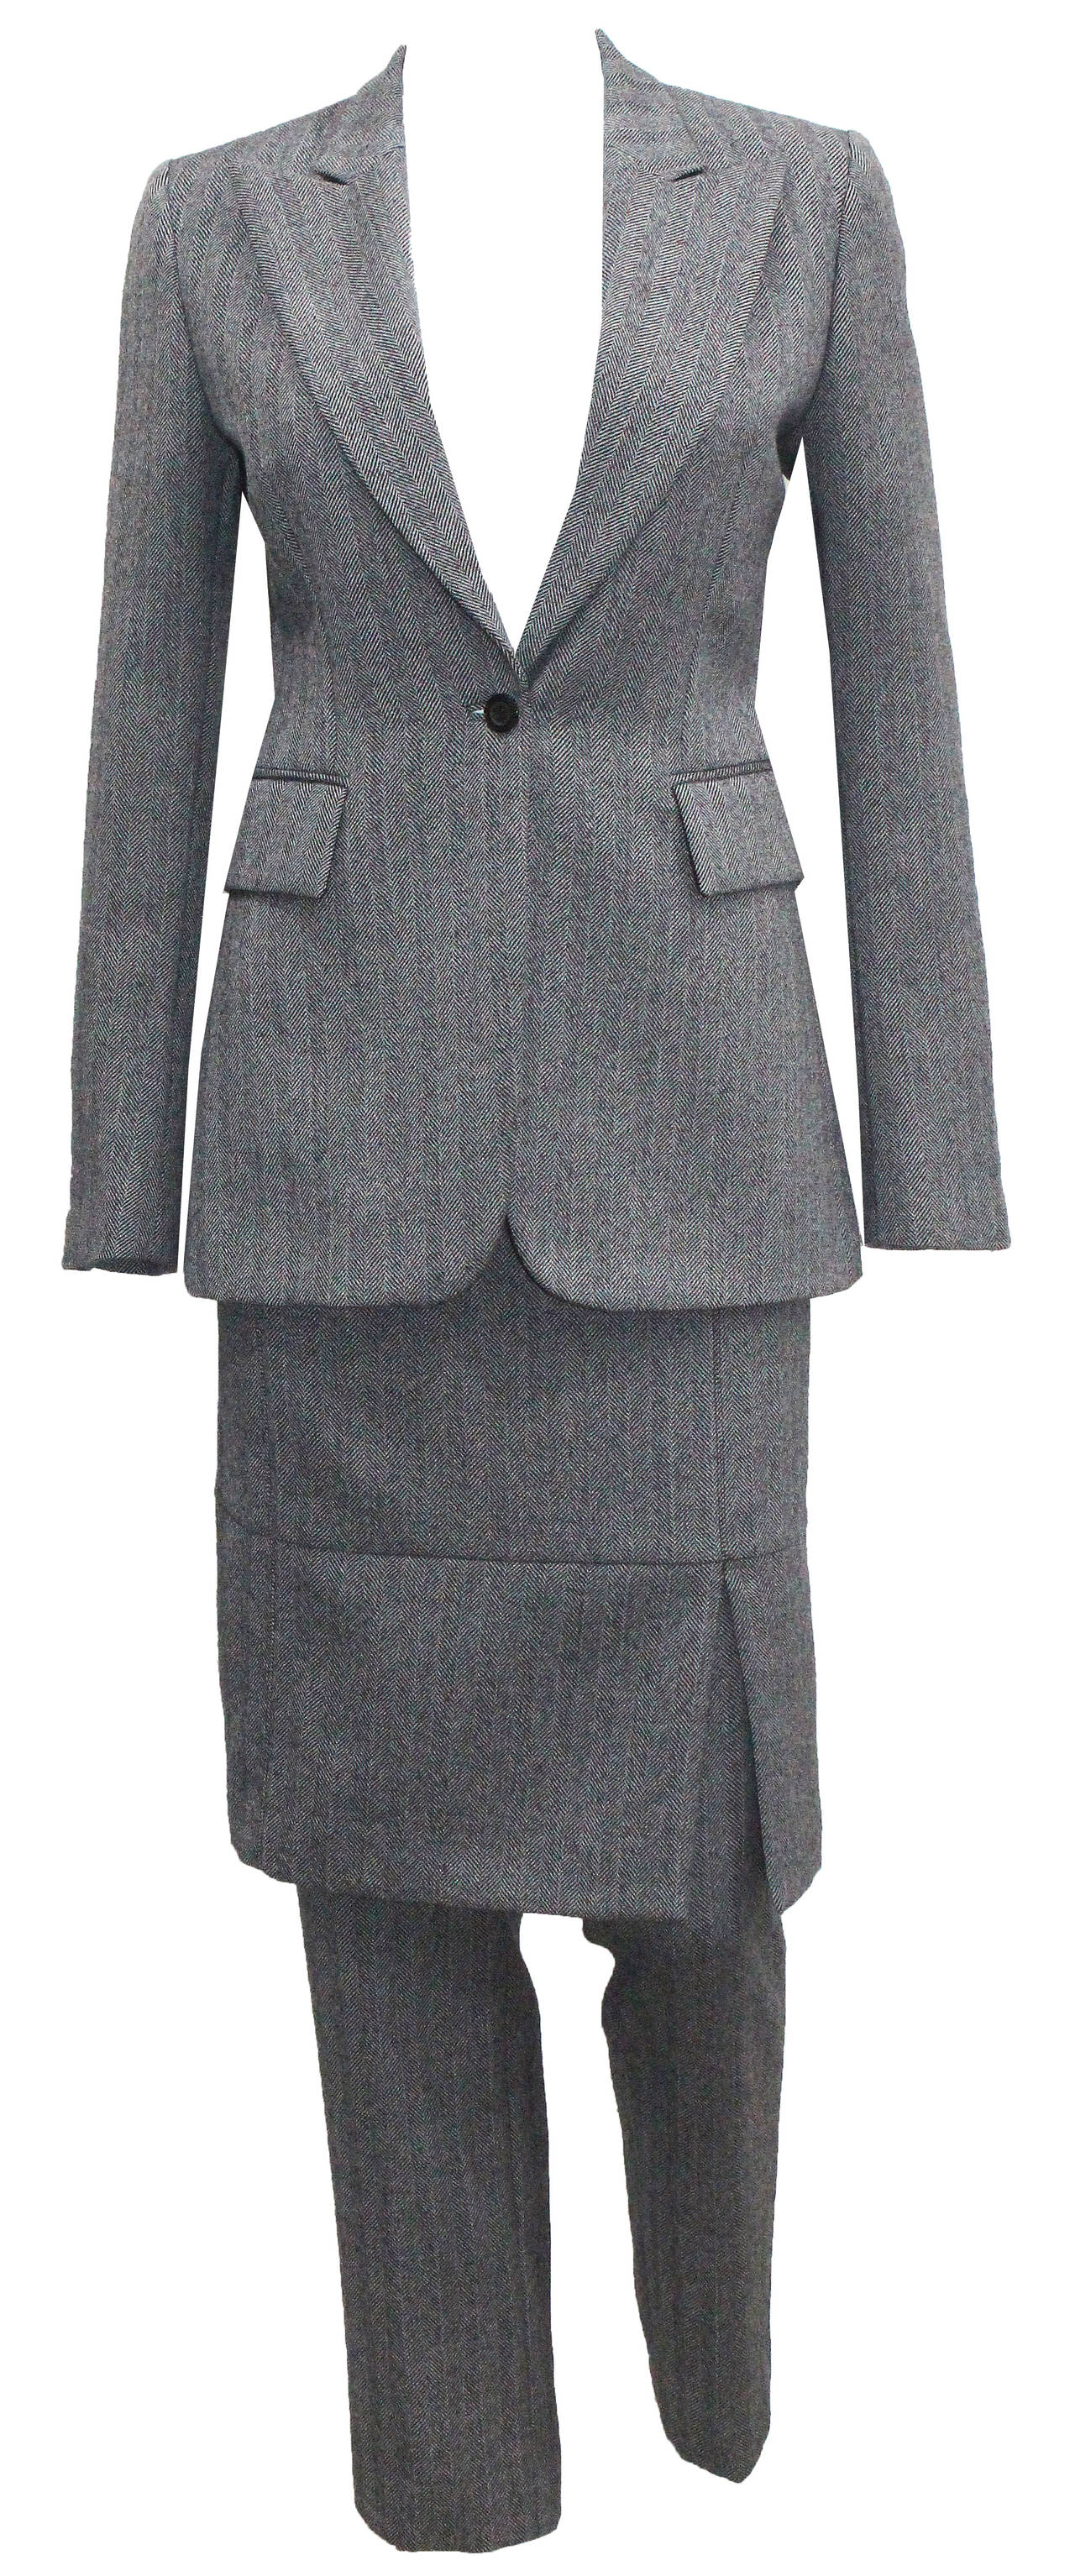 A unworn tweed 3 piece suit by Gucci, designed by Tom Ford for the Autumn/Winter 2000 runway collection. The suit features a fitted blazer, cigarette tweed pants with calfskin leather details and fitted pencil skirt also with leather details. 100%